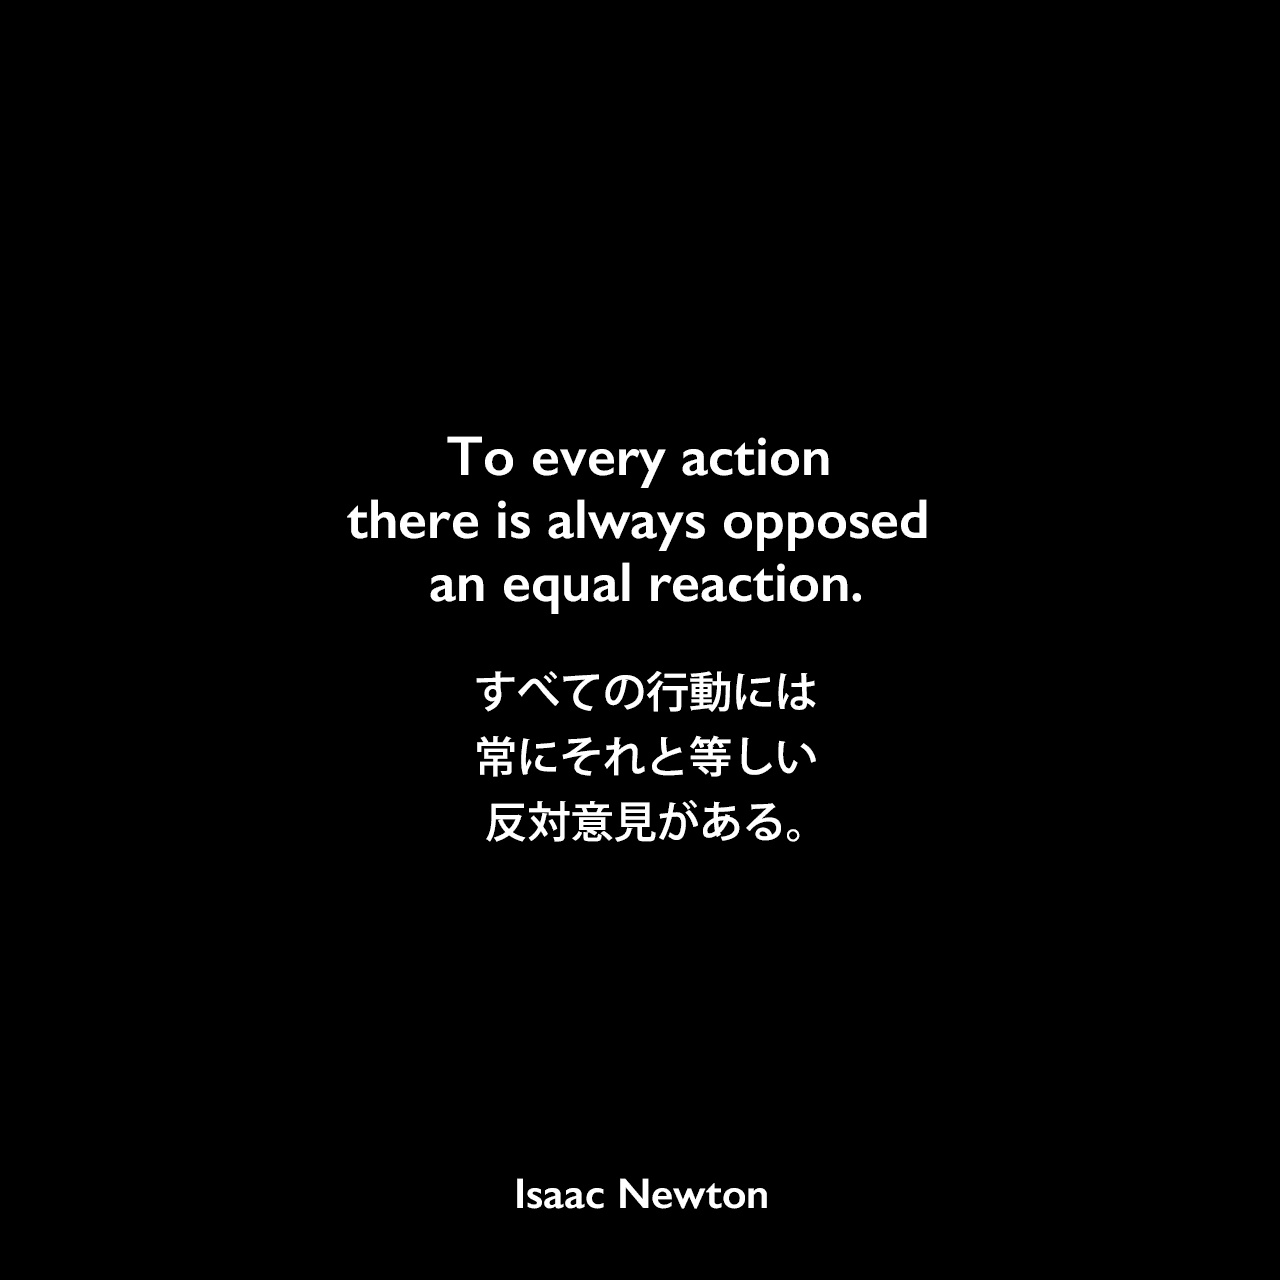 To every action there is always opposed an equal reaction.すべての行動には、常にそれと等しい反対意見がある。Isaac Newton